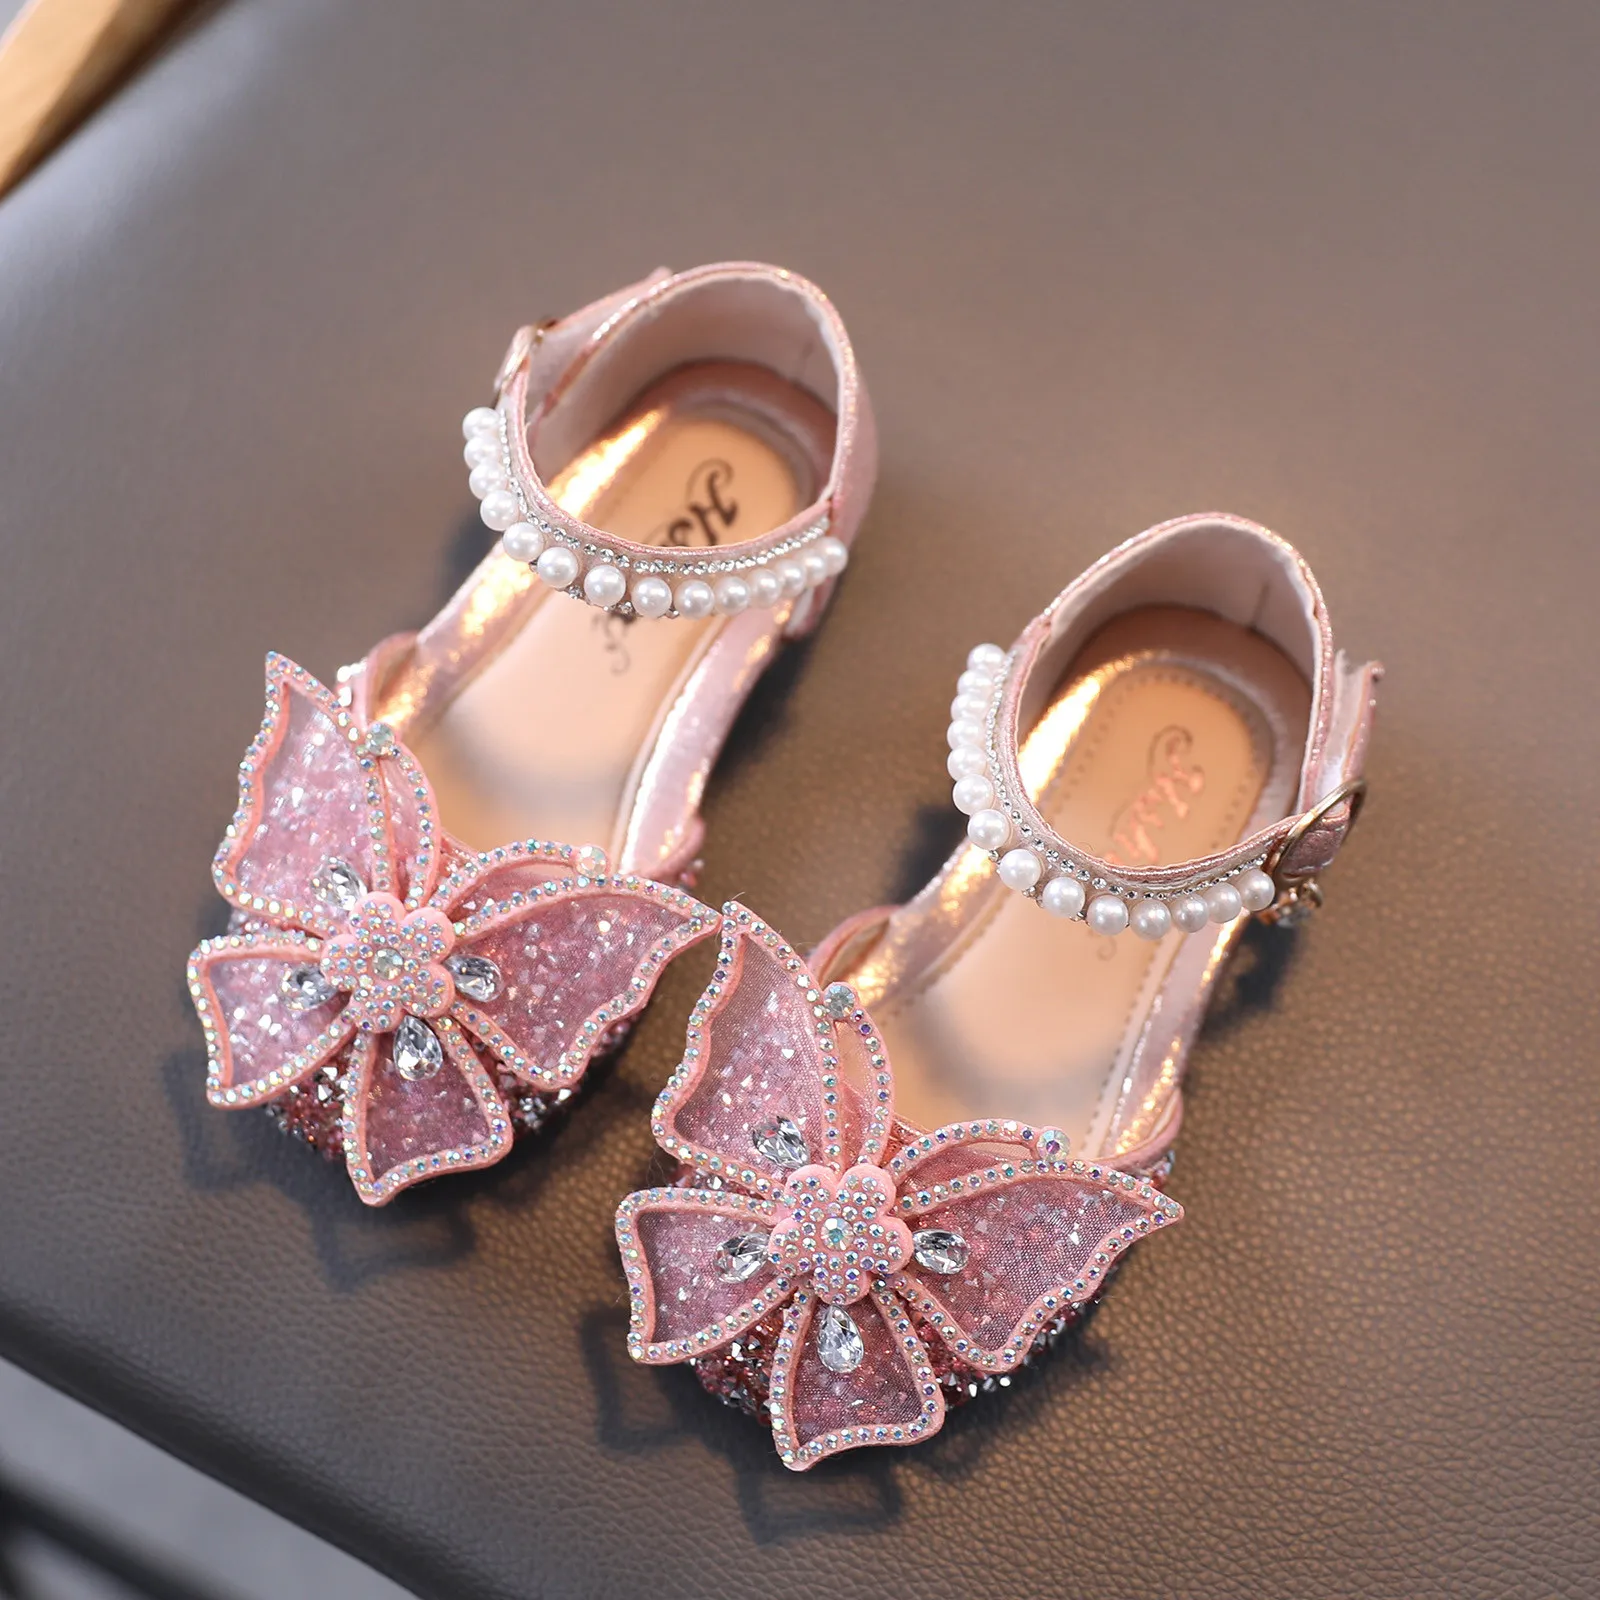 

Infant Kids Sandales Baby Girls Pearl Crystal Bling Bowknot Single Princess Shoes Sandals chaussure enfant fille босоножки